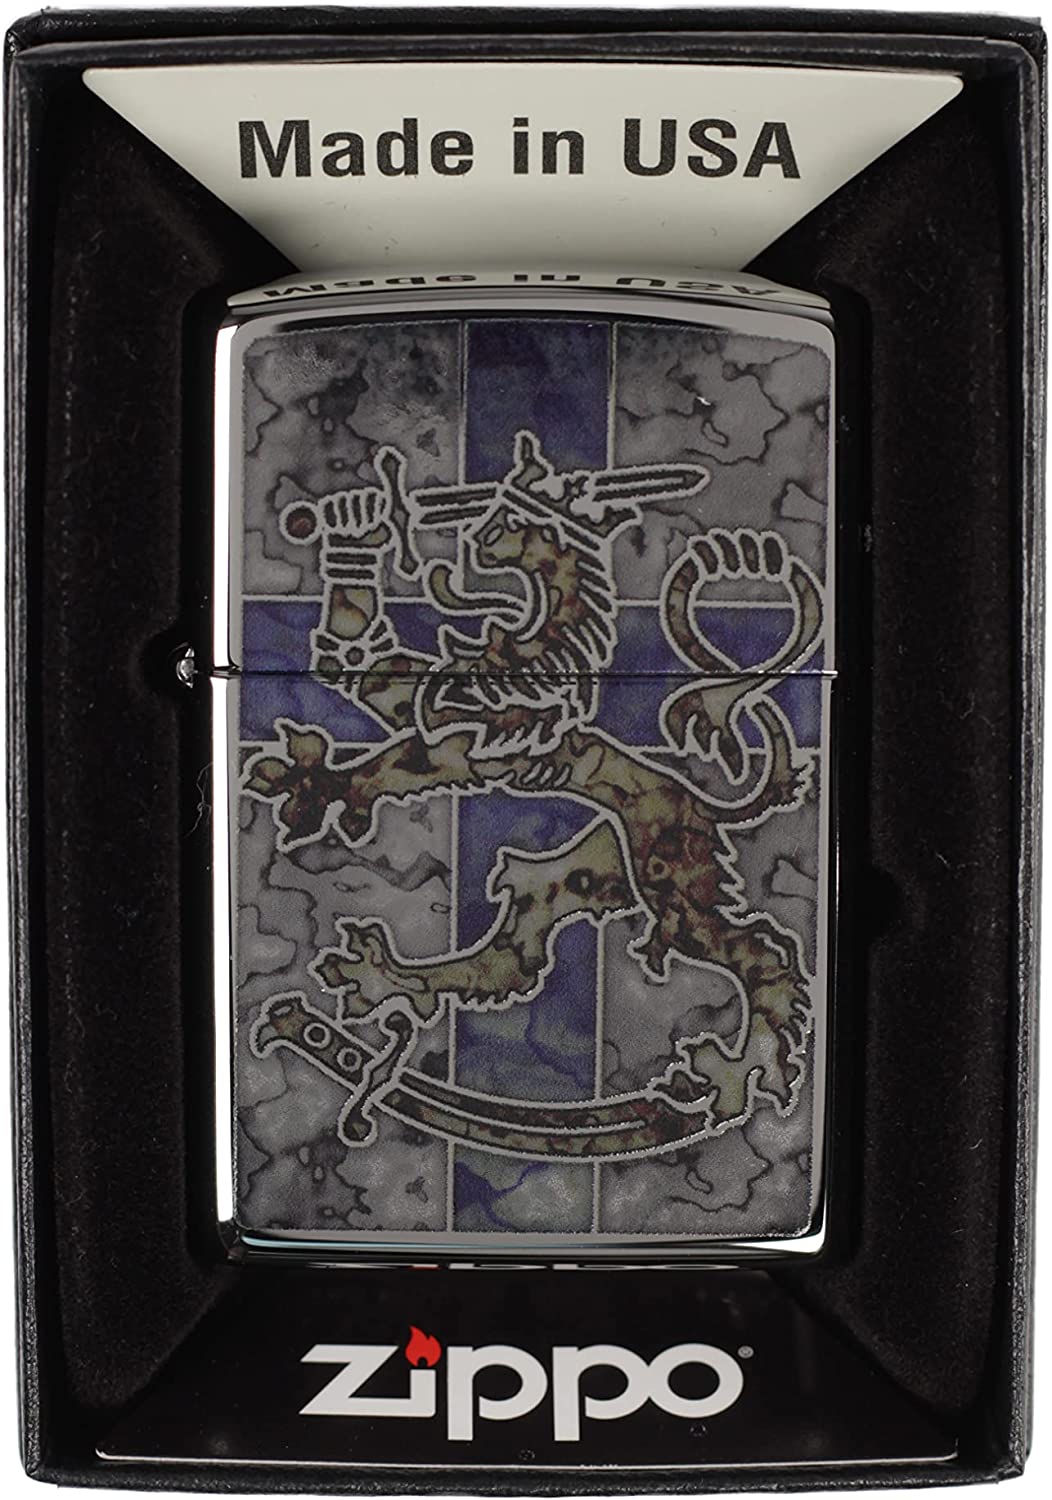 Finnish Rampant Lion with Crown and Sword - Fusion High Polish Chrome Zippo Lighter